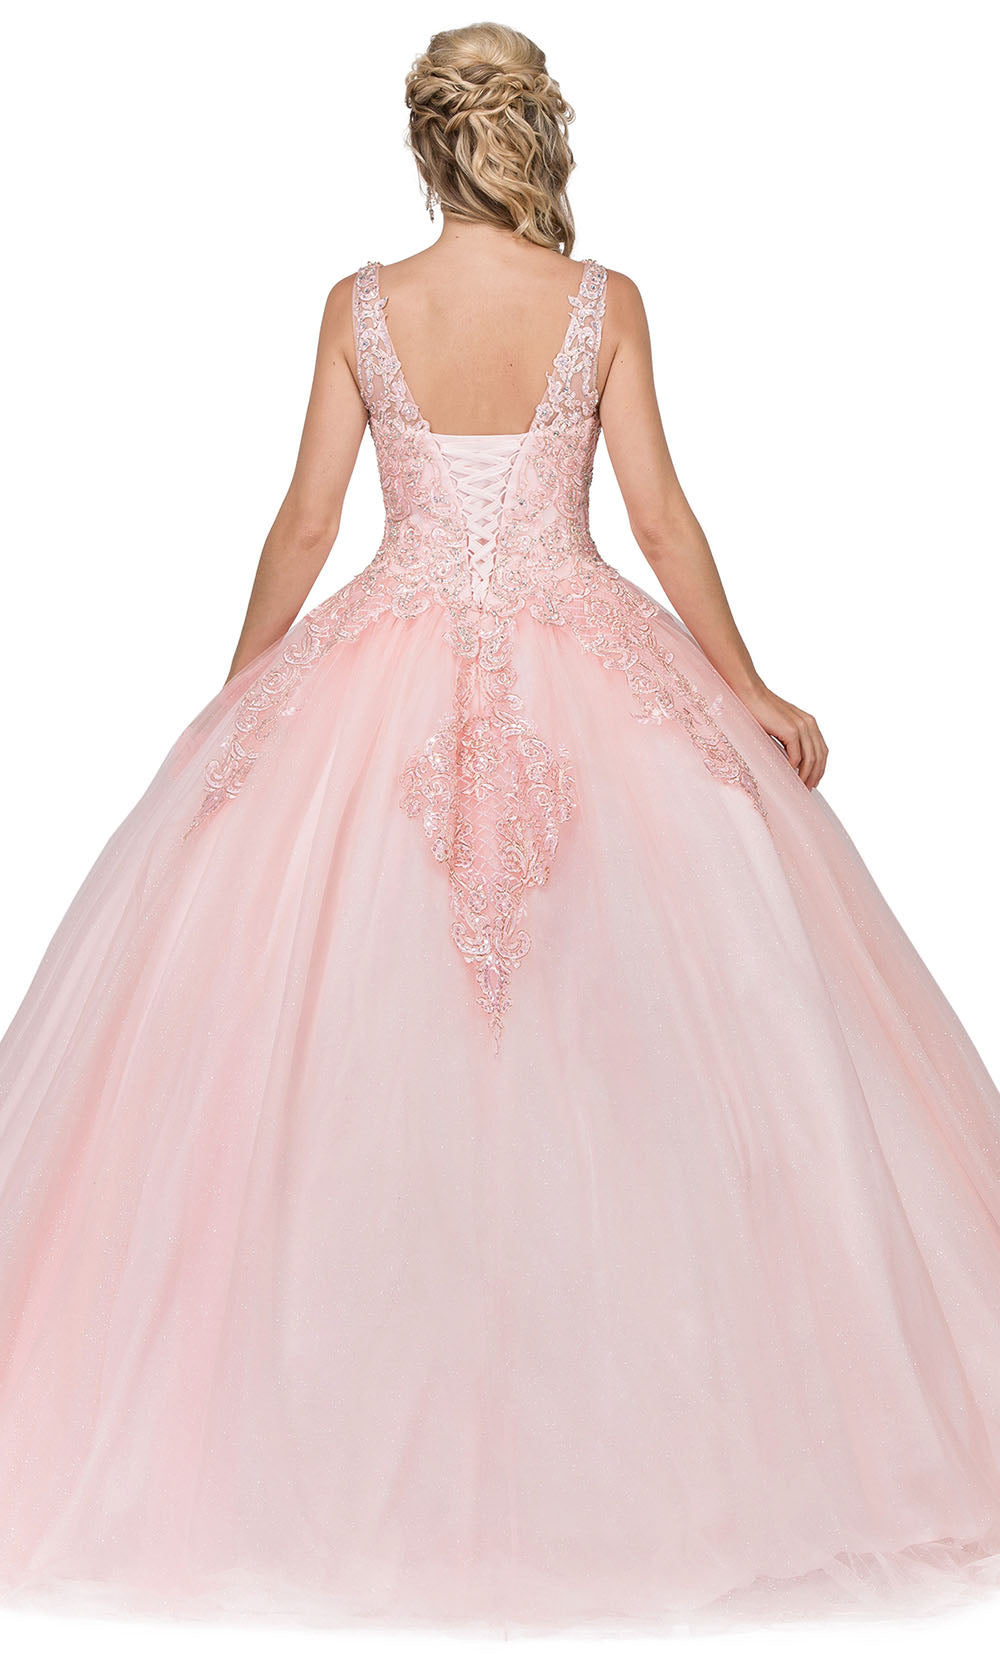 Dancing Queen - 1271 Embroidered Wide V Neck Ballgown In Pink